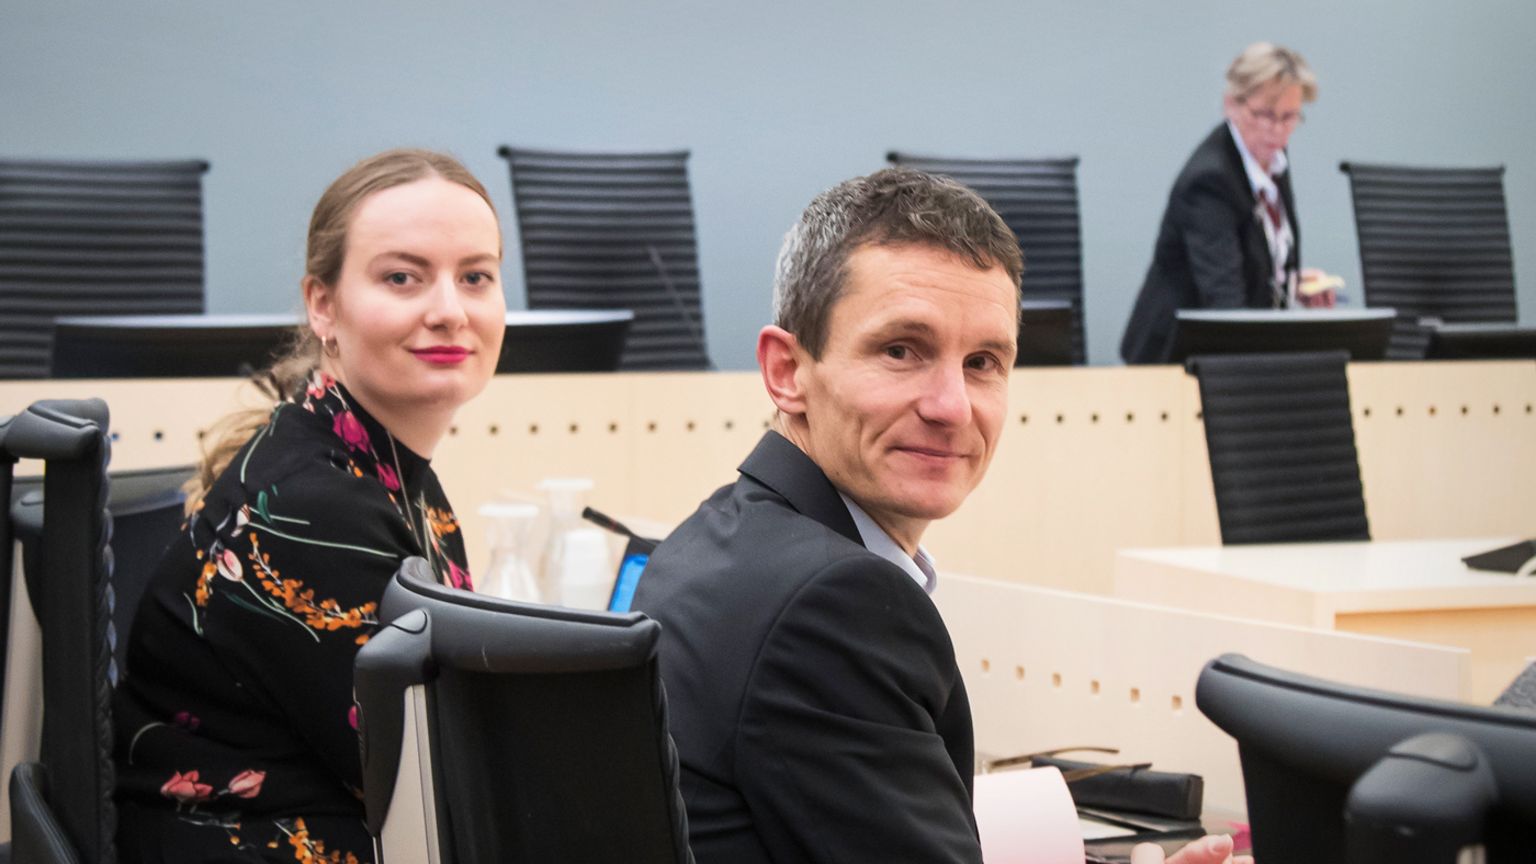 Nature and Youth's Ingrid Skjoldvaer (L) and the head of Greenpeace Norway, Truls Gulowsen, in an Oslo courtroom, 2017